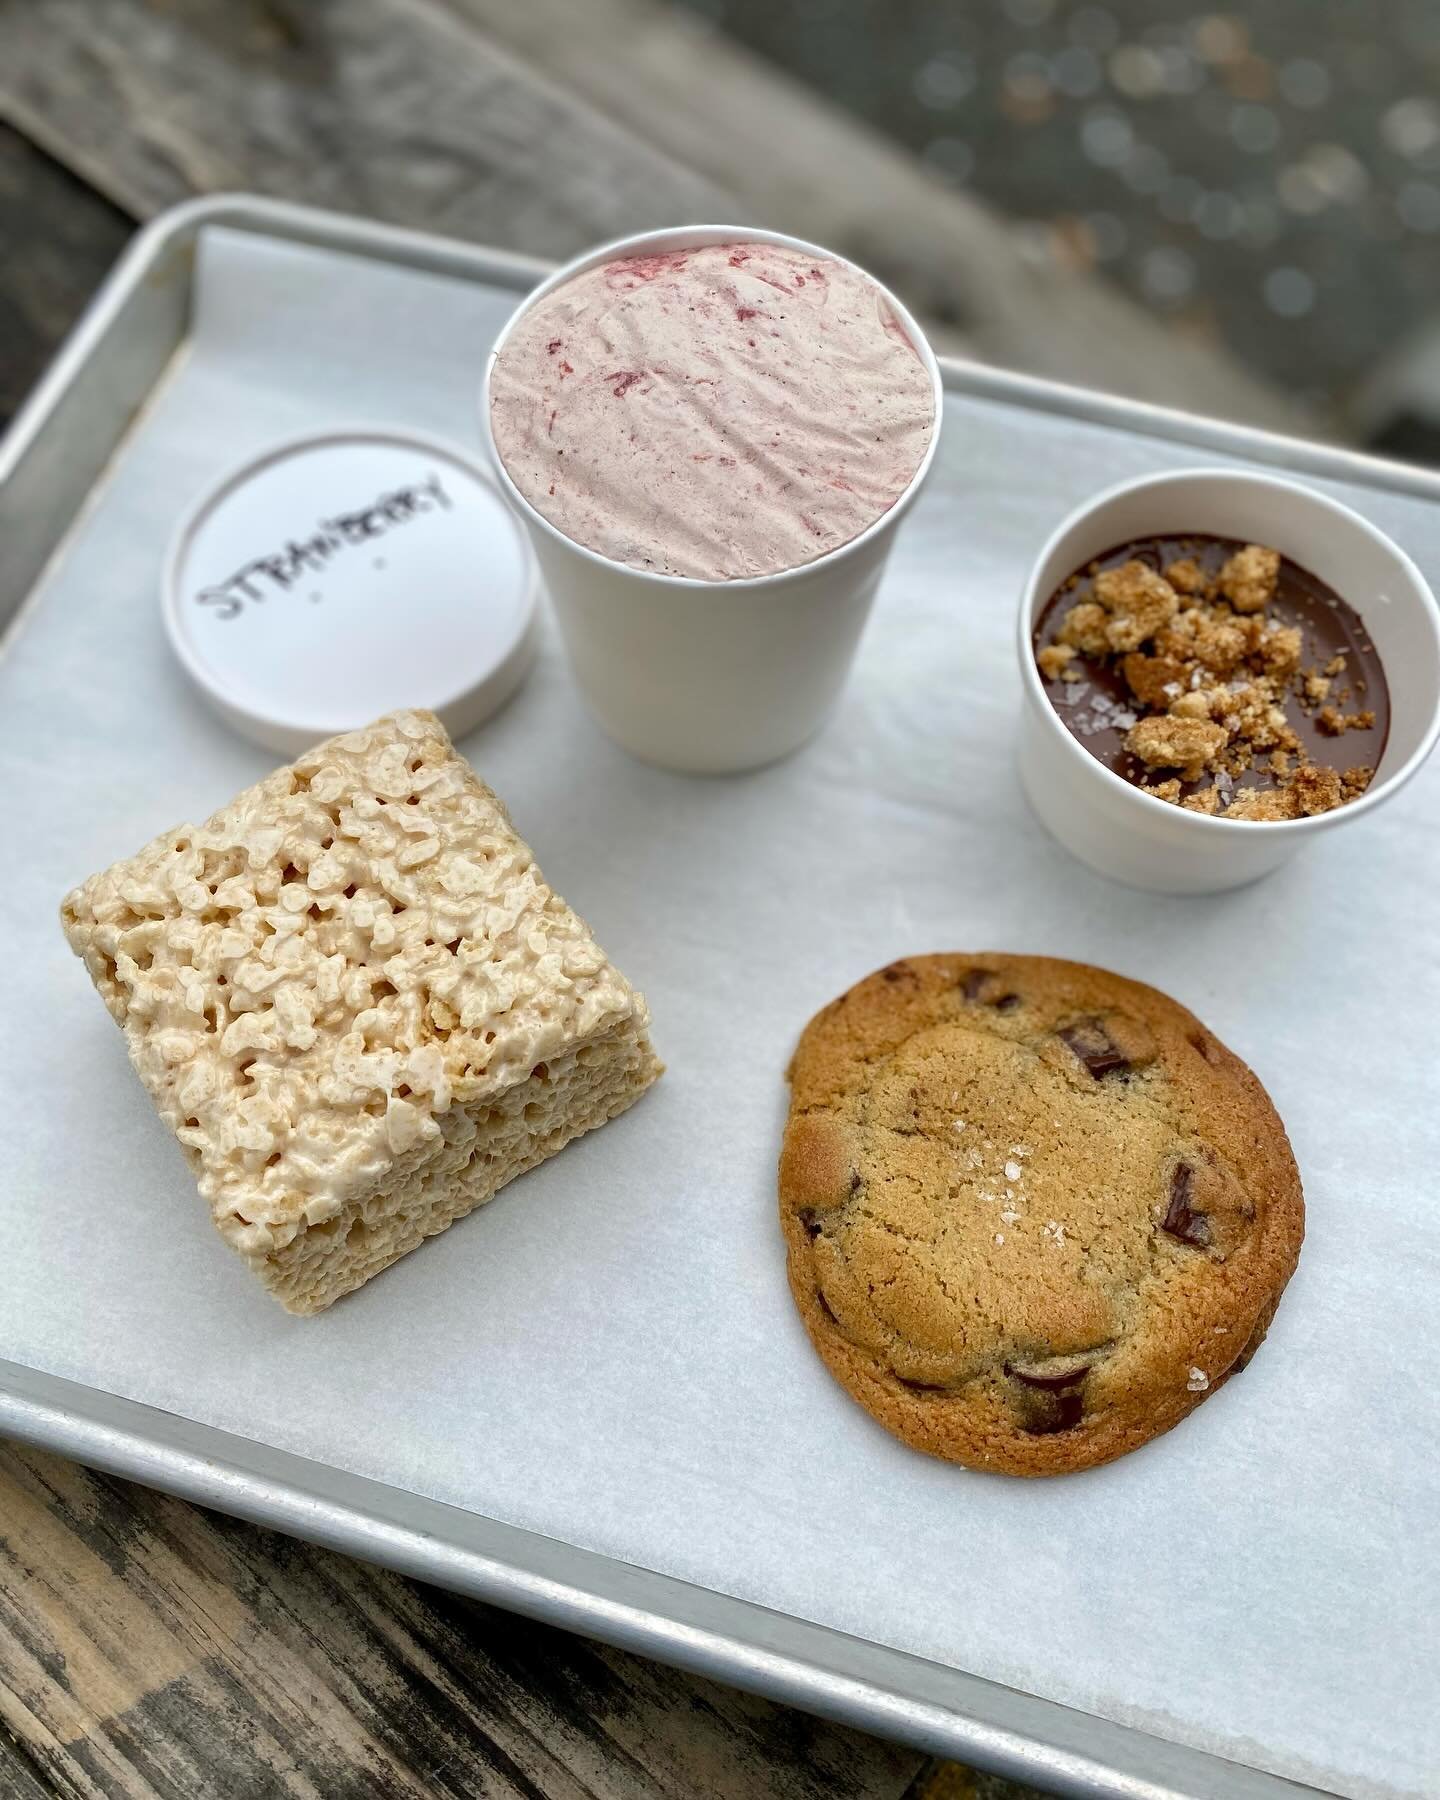 Indroducing Cornelly Bake Shop!  @igleche bringing you the sweets on the go!

Available for takeout!
Chocolate Chunk Cookie
Malted Rice Crispy
Pints of Ice Cream (seasonal 🍓shown)
Chocolate Budino w/cardamom biscuit